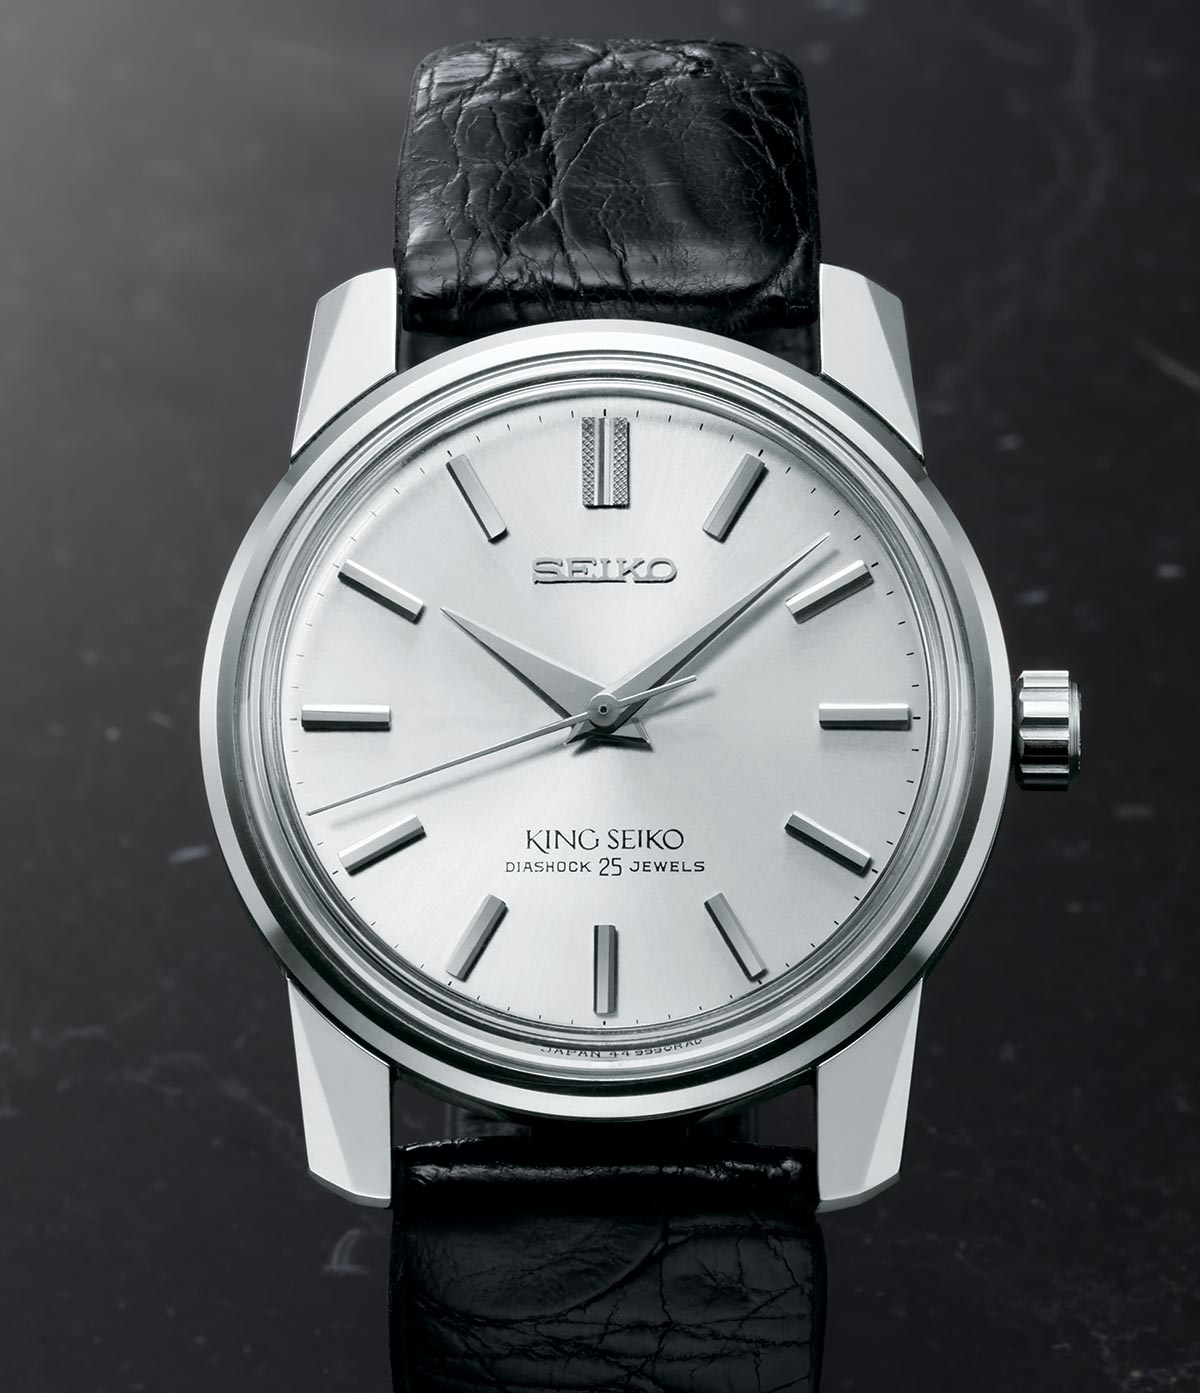 Seiko - King Seiko KSK SJE083 | Time and Watches | The watch blog